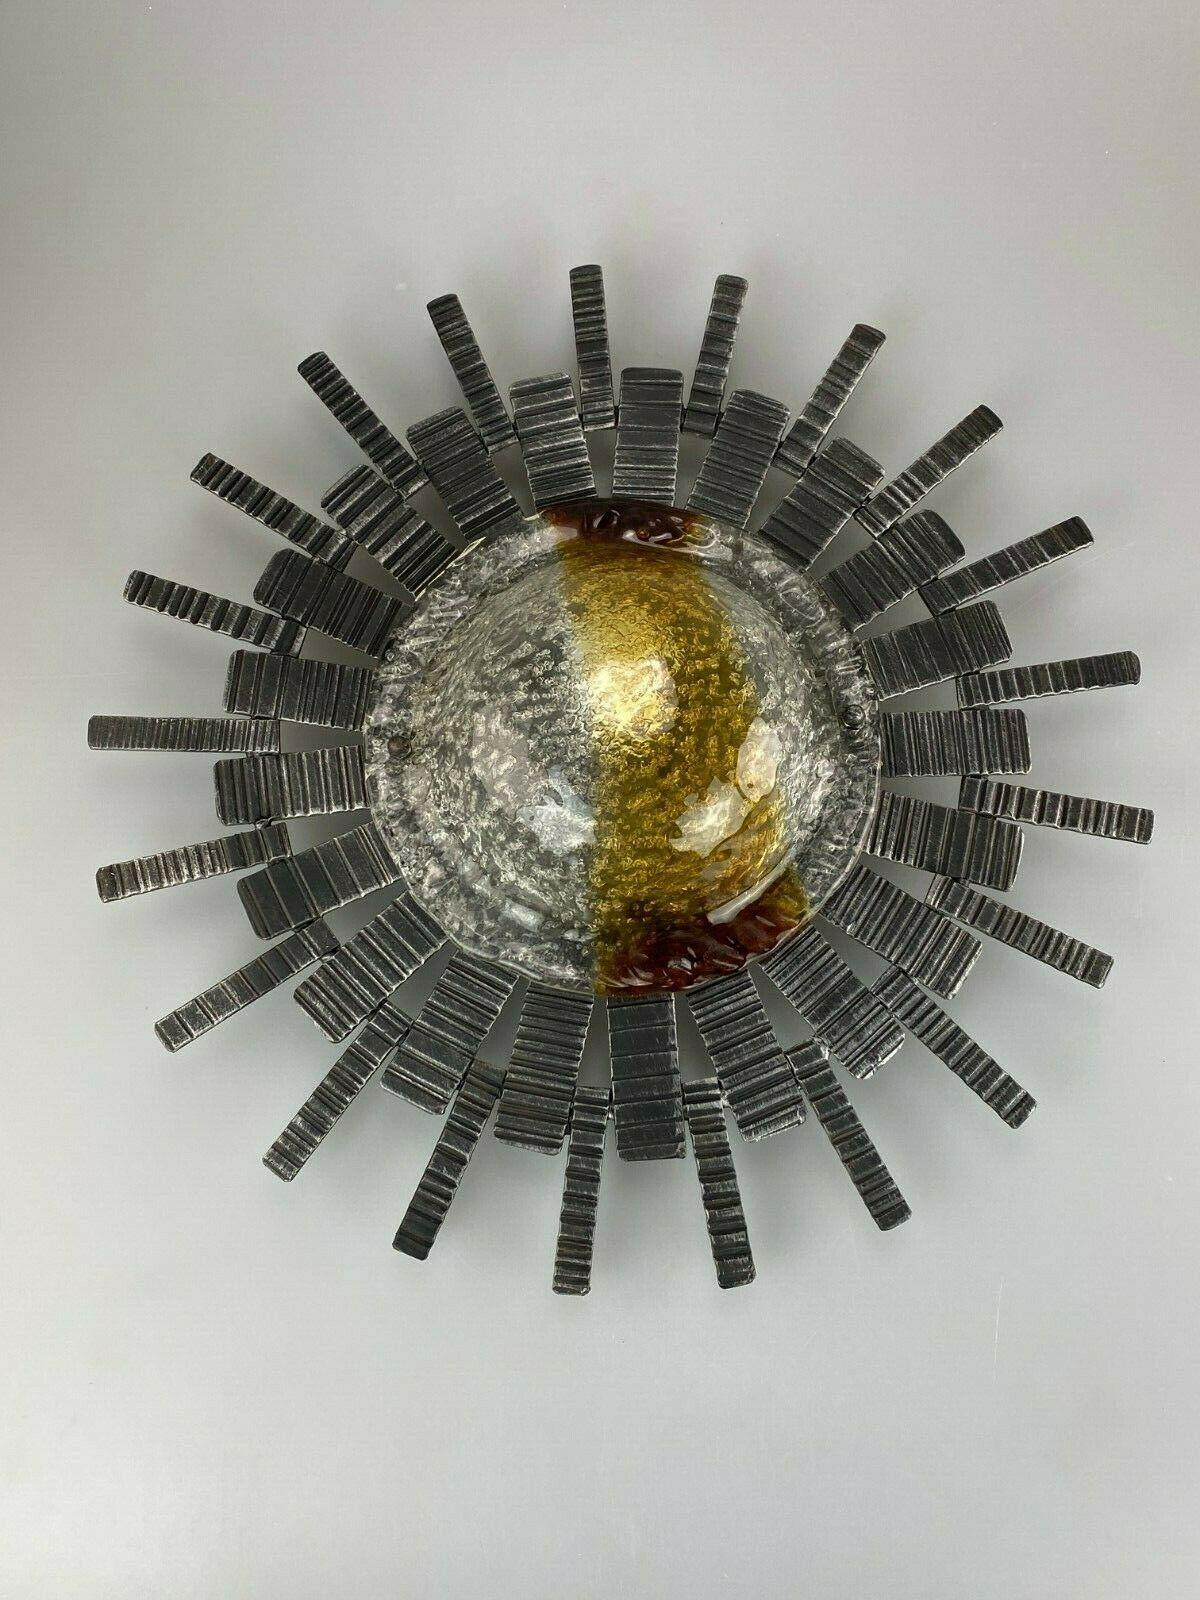 60s 70s Brutalist Wall Lamp Sconce Iron & Glass Wall Lamp 60s 70s

Object: wall lamp

Manufacturer:

Condition: good

Age: around 1960-1970

Dimensions:

Diameter = 48cm
Height = 10cm

Other notes:

The pictures serve as part of the